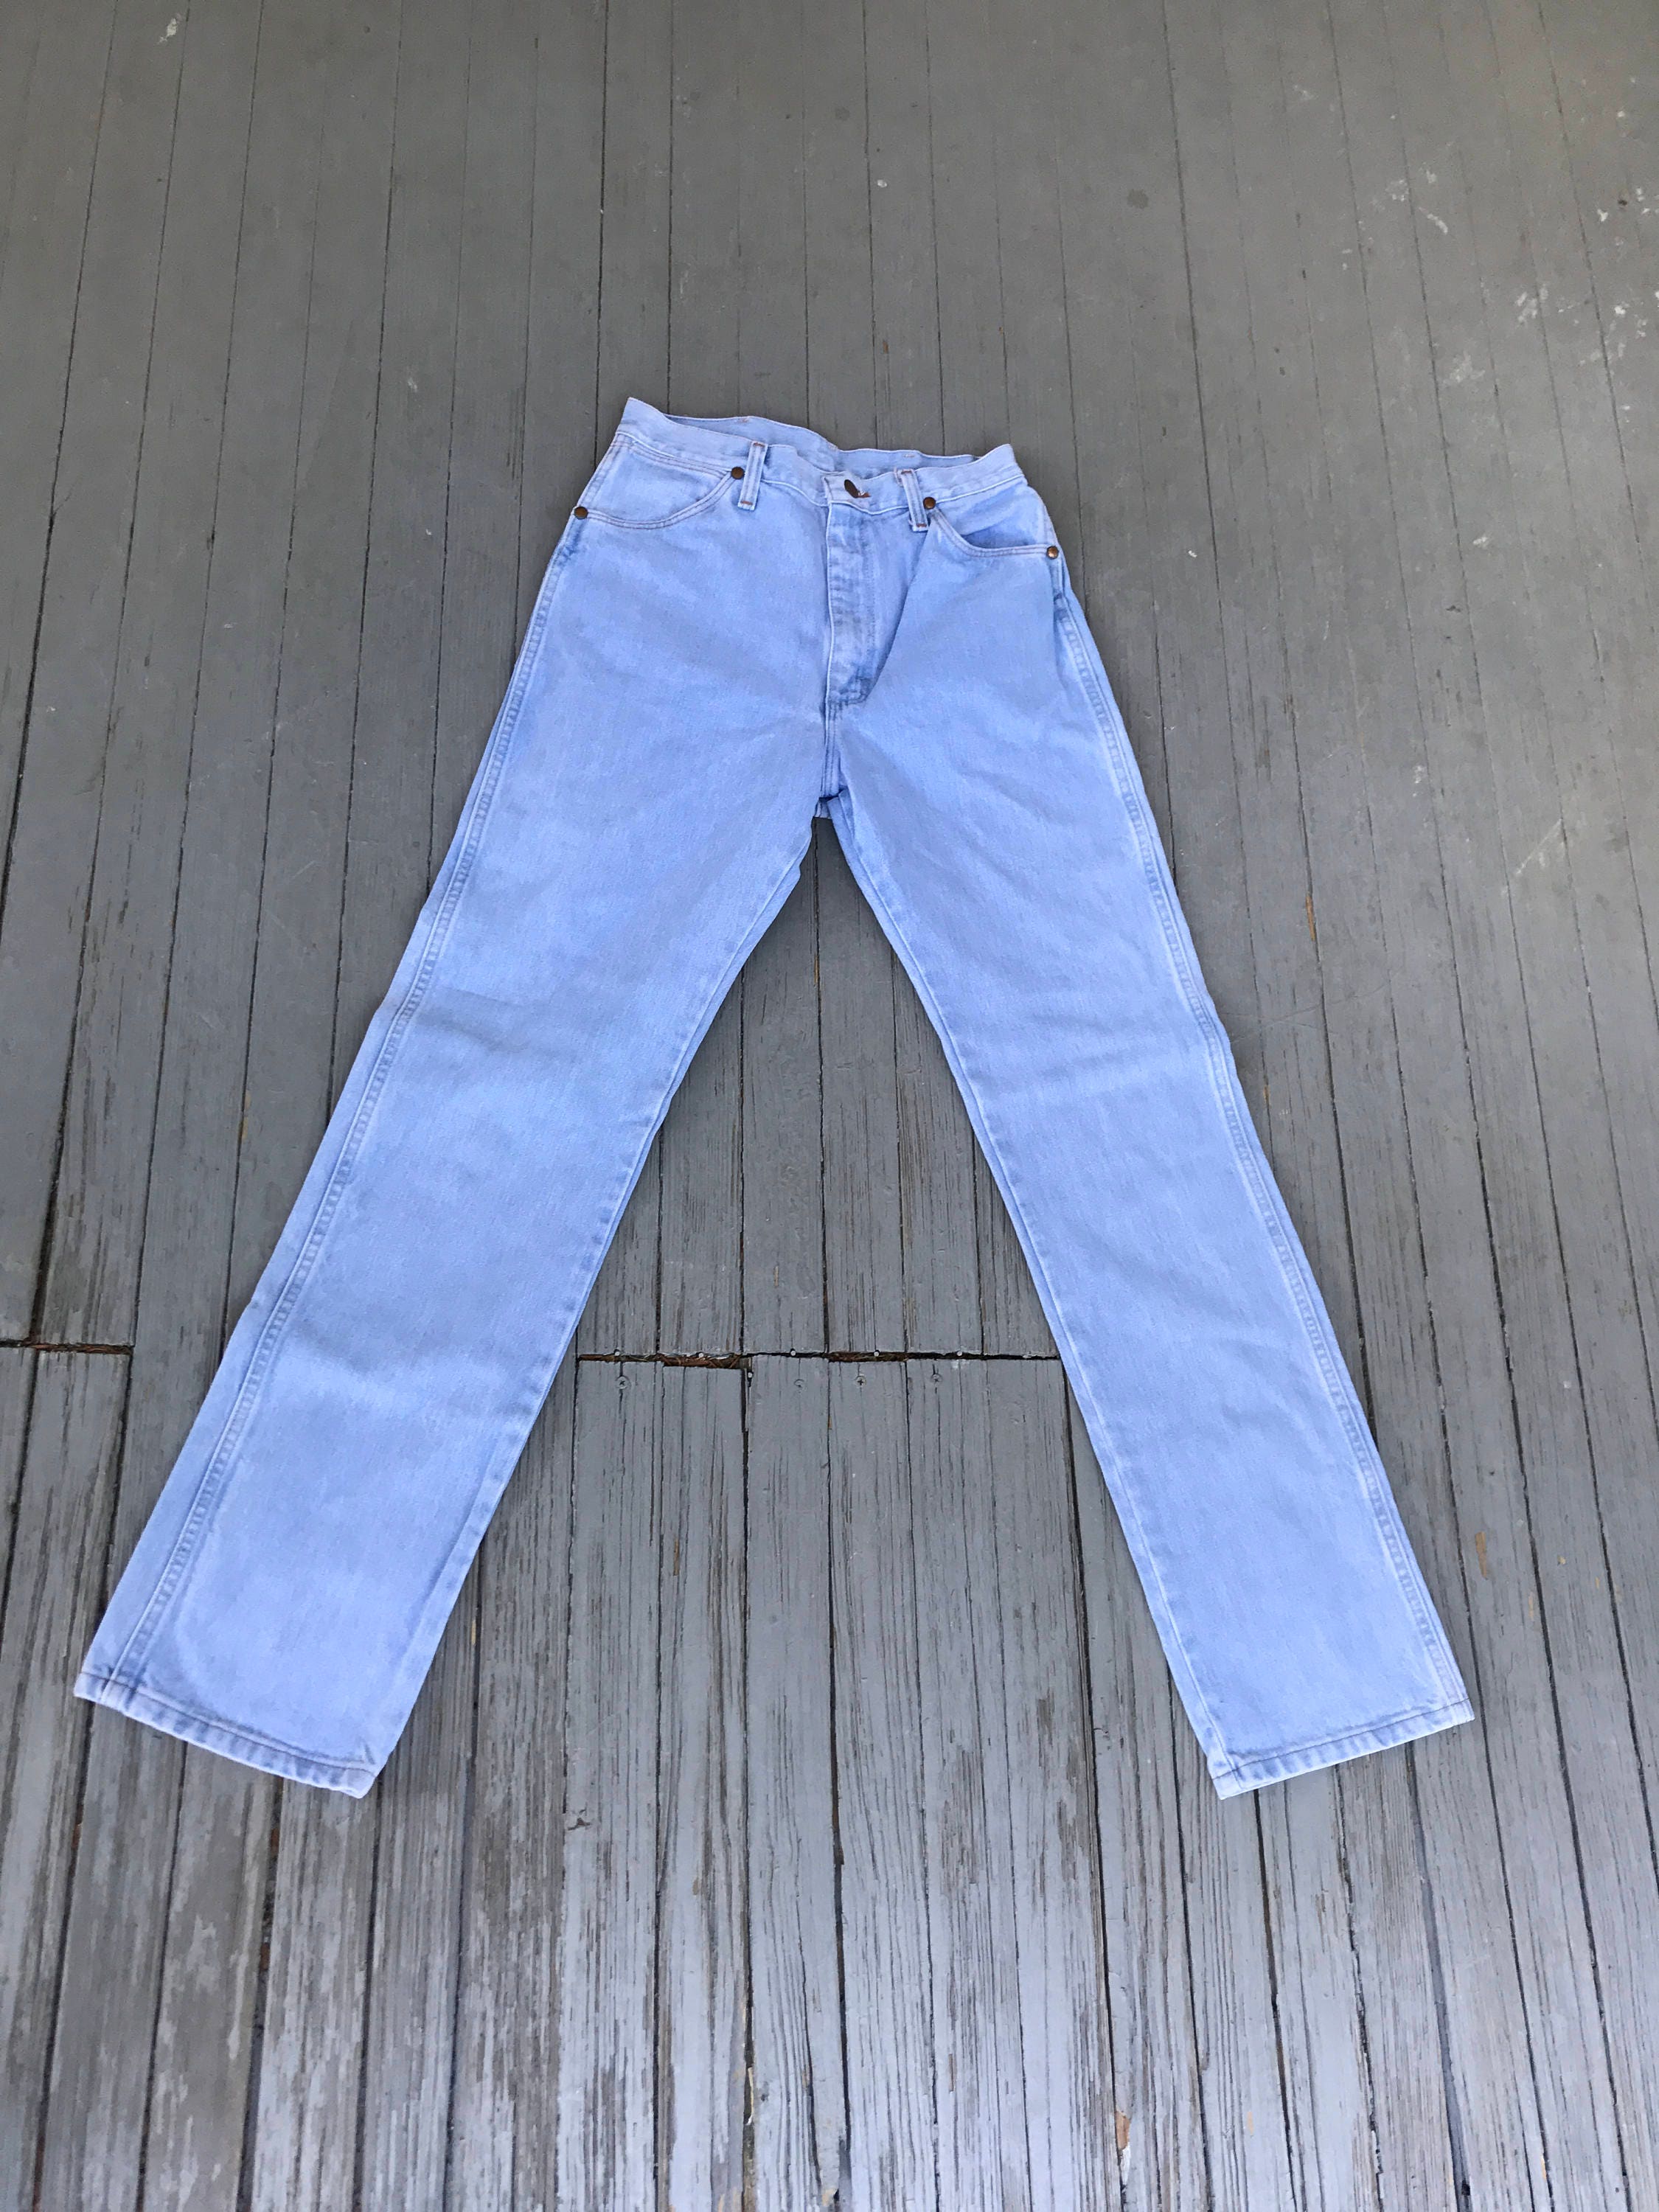 Vintage 70s Wrangler Jeans Faded Blue Jeans Straight Leg Mom Jeans High  Rise Distressed 1970s Stone Wash Women's Pants Made in USA 28 x 34